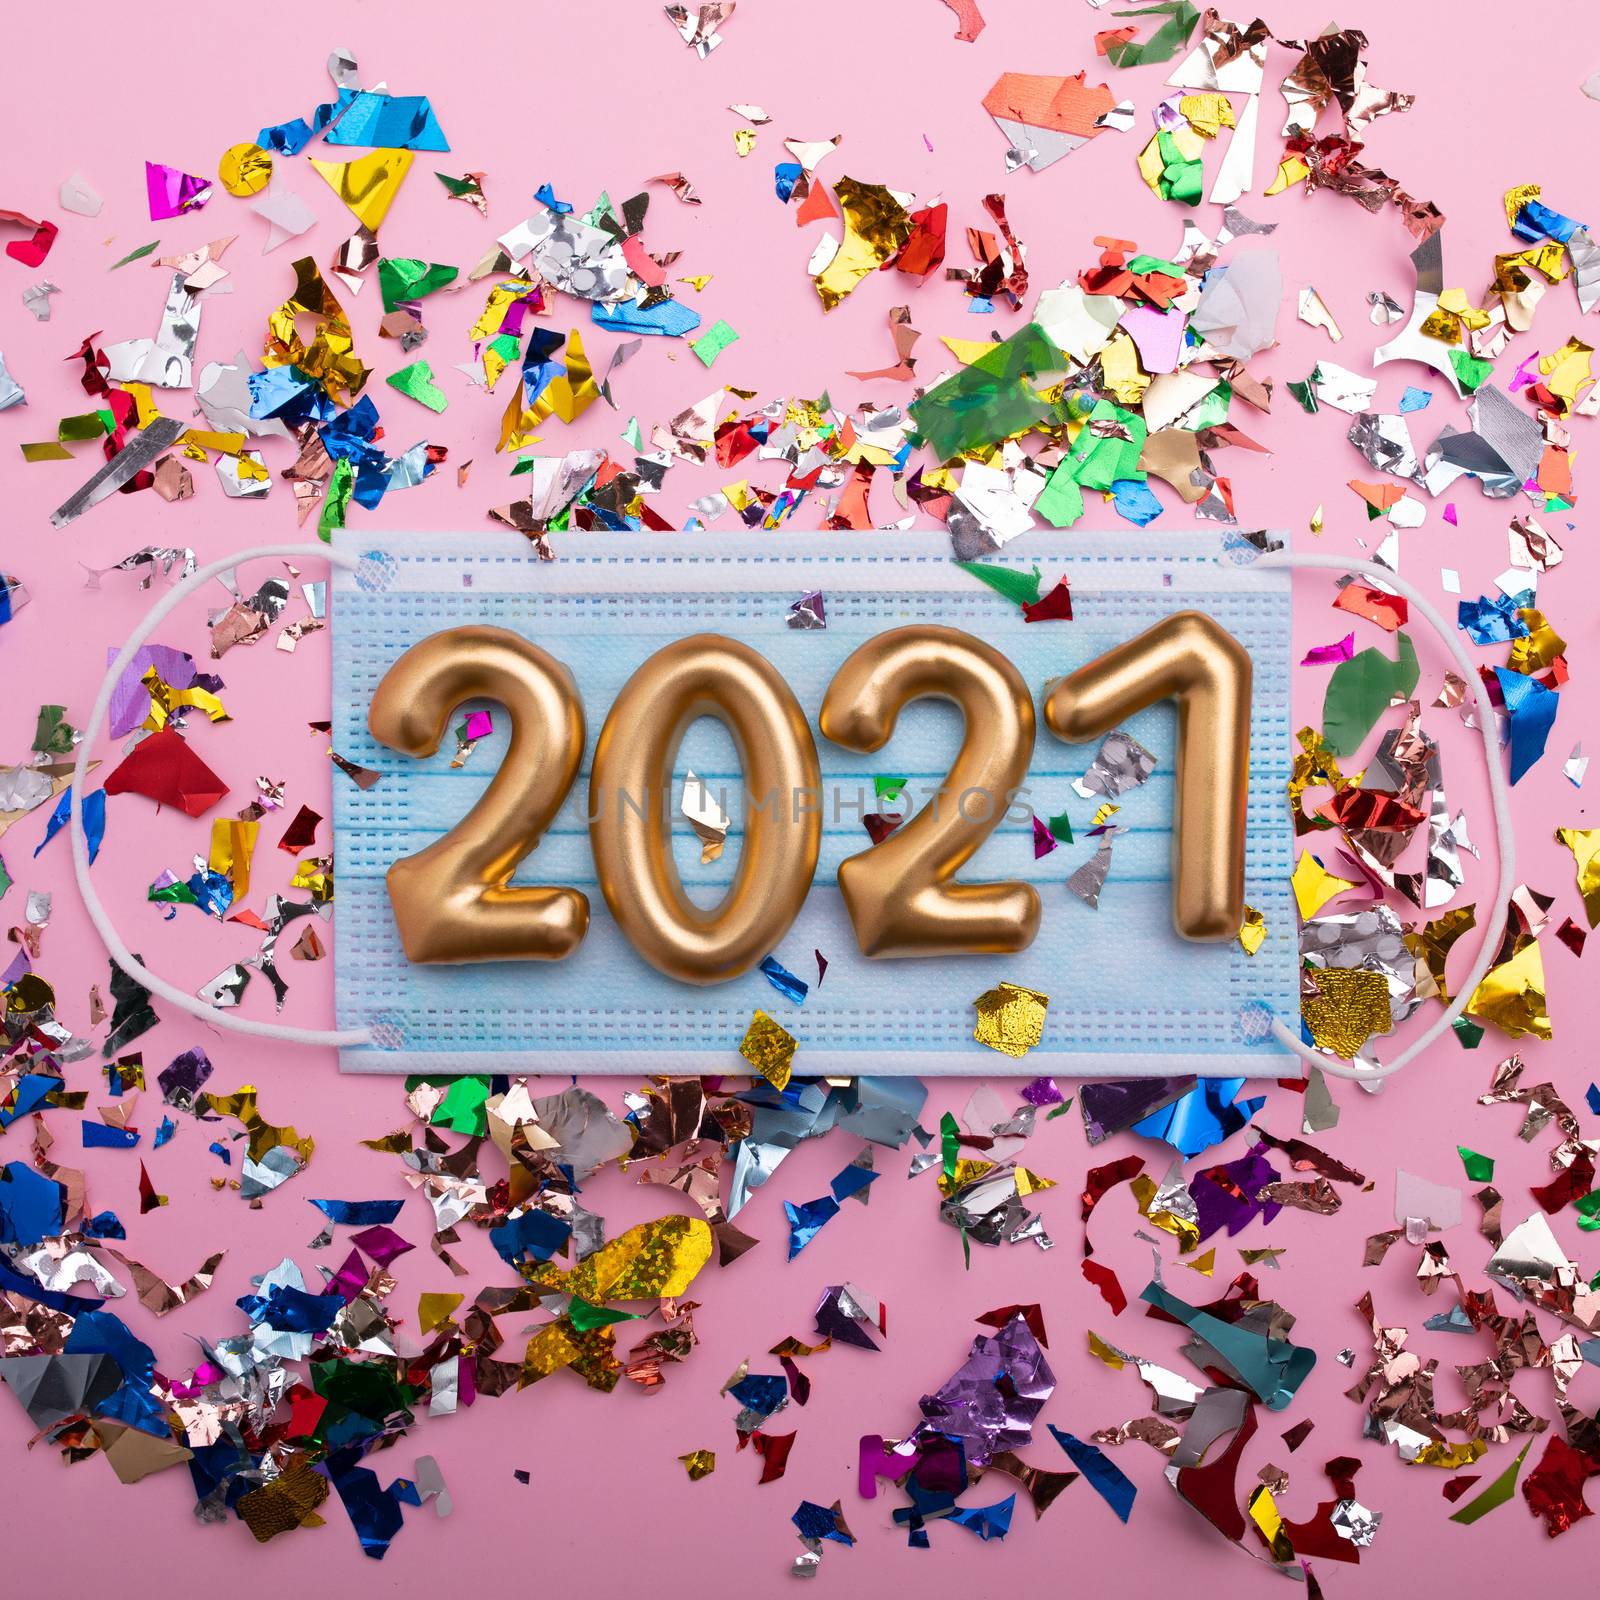 Happy new year 2021 with face mask and confetti by adamr